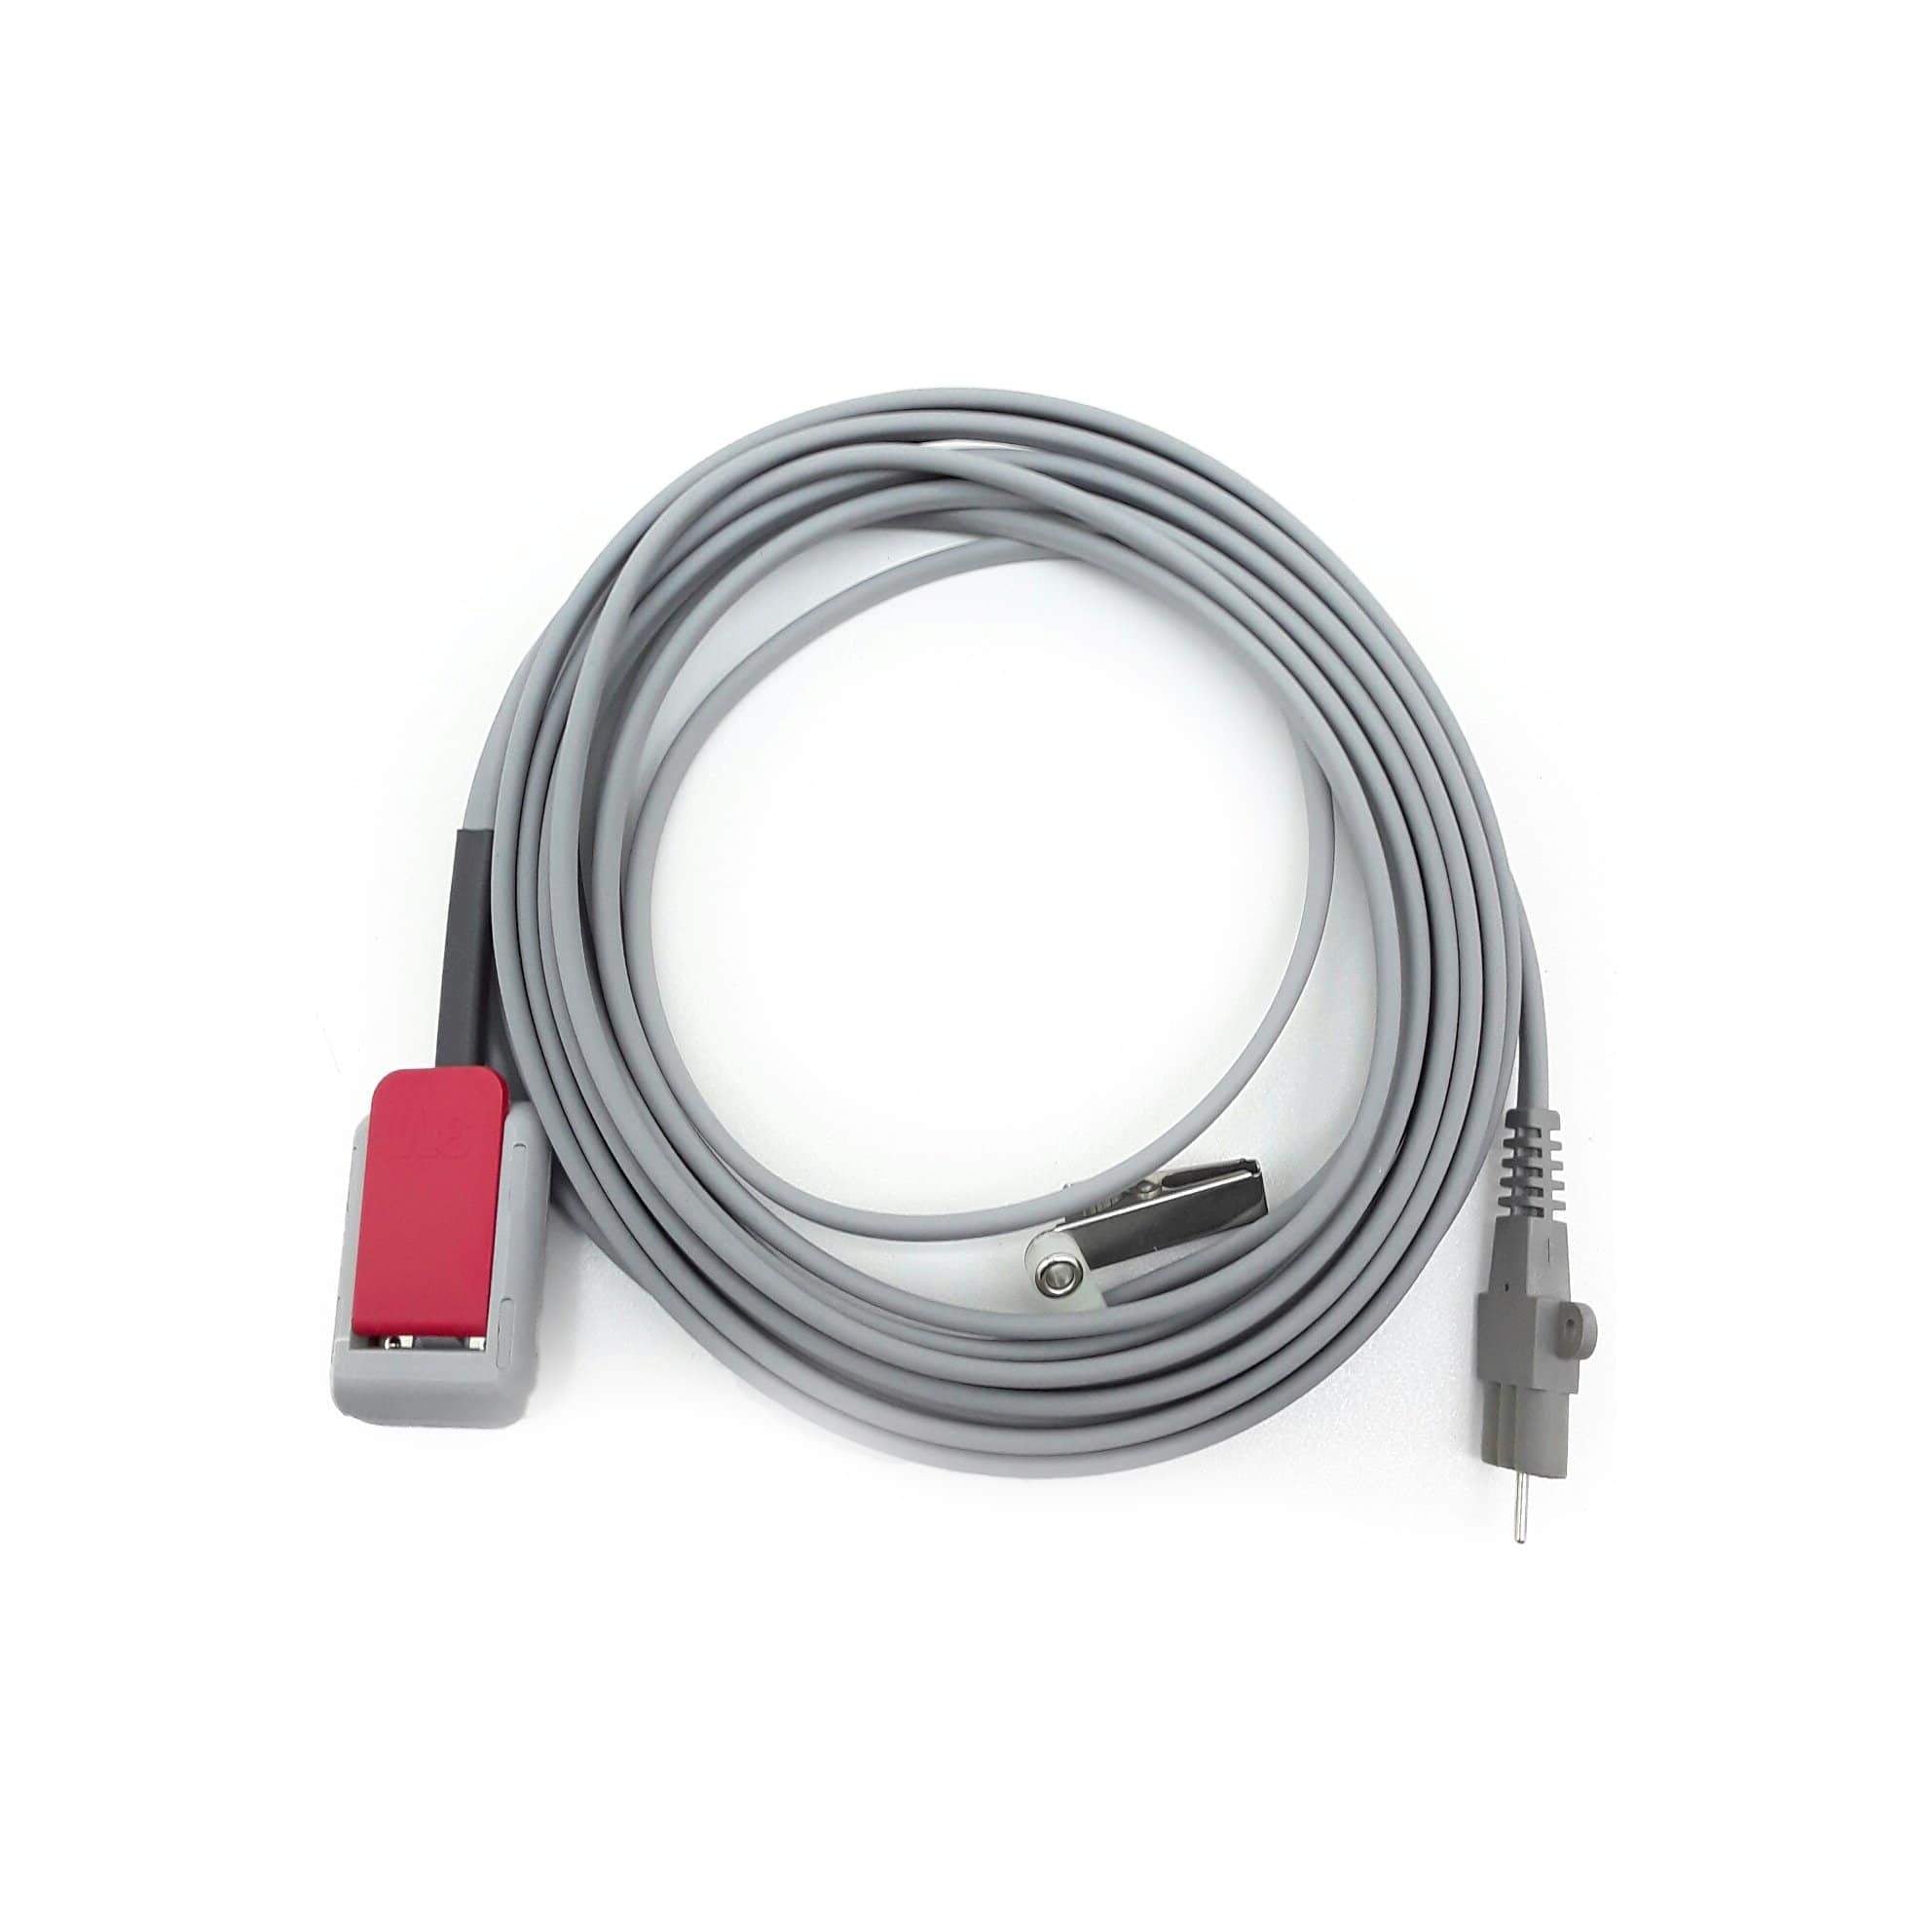 3M Electrosurgical Grounding Cable